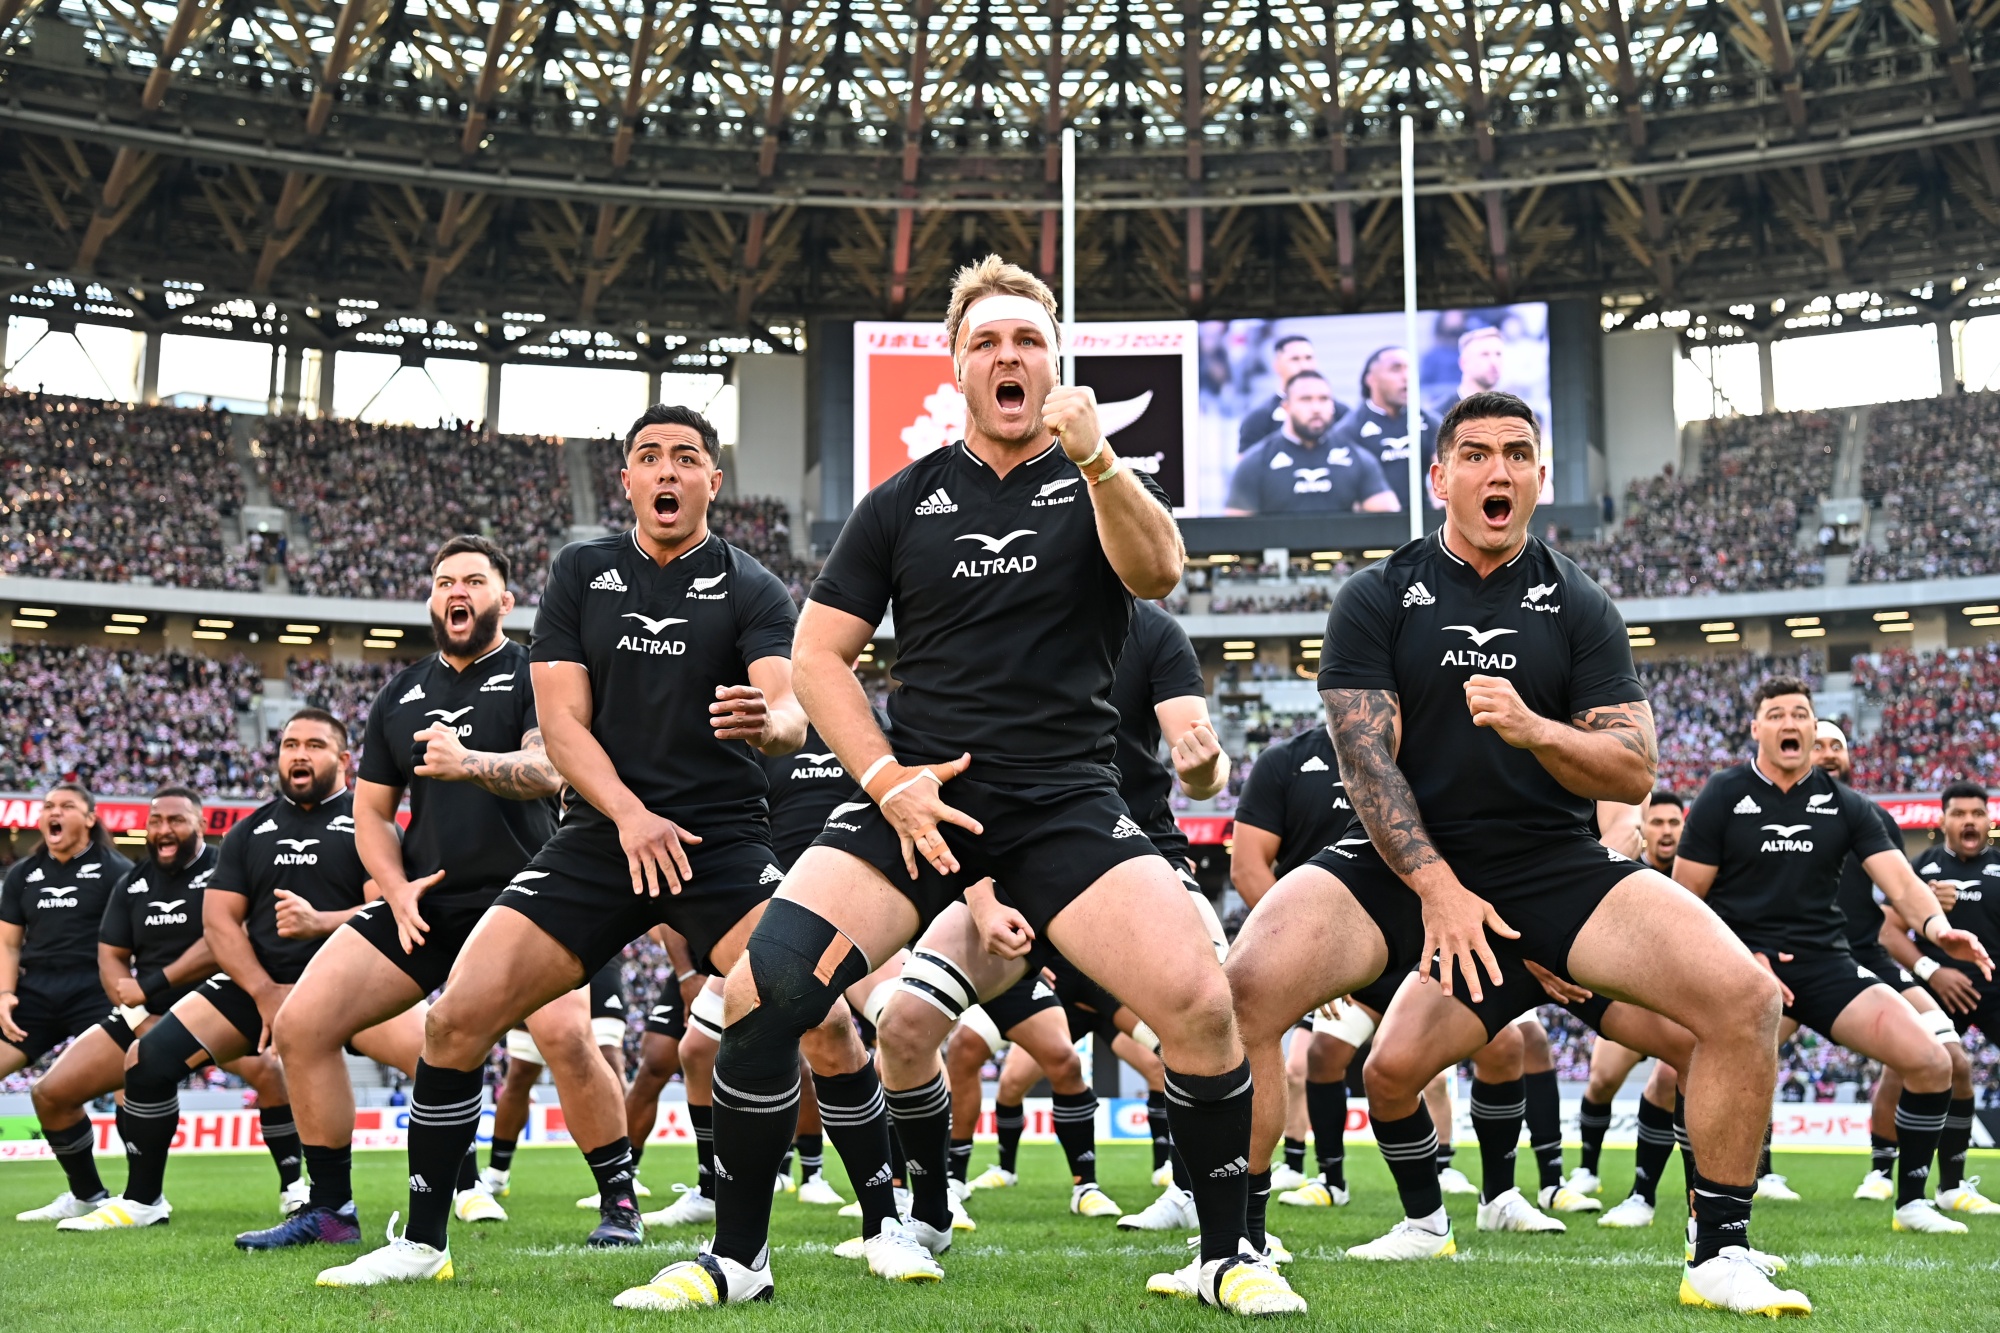 The All Blacks Have Shared an Update about the Team's Condition, Mentioning that they Have a Strong Squad and Only a Few Players are Returning from Injuries